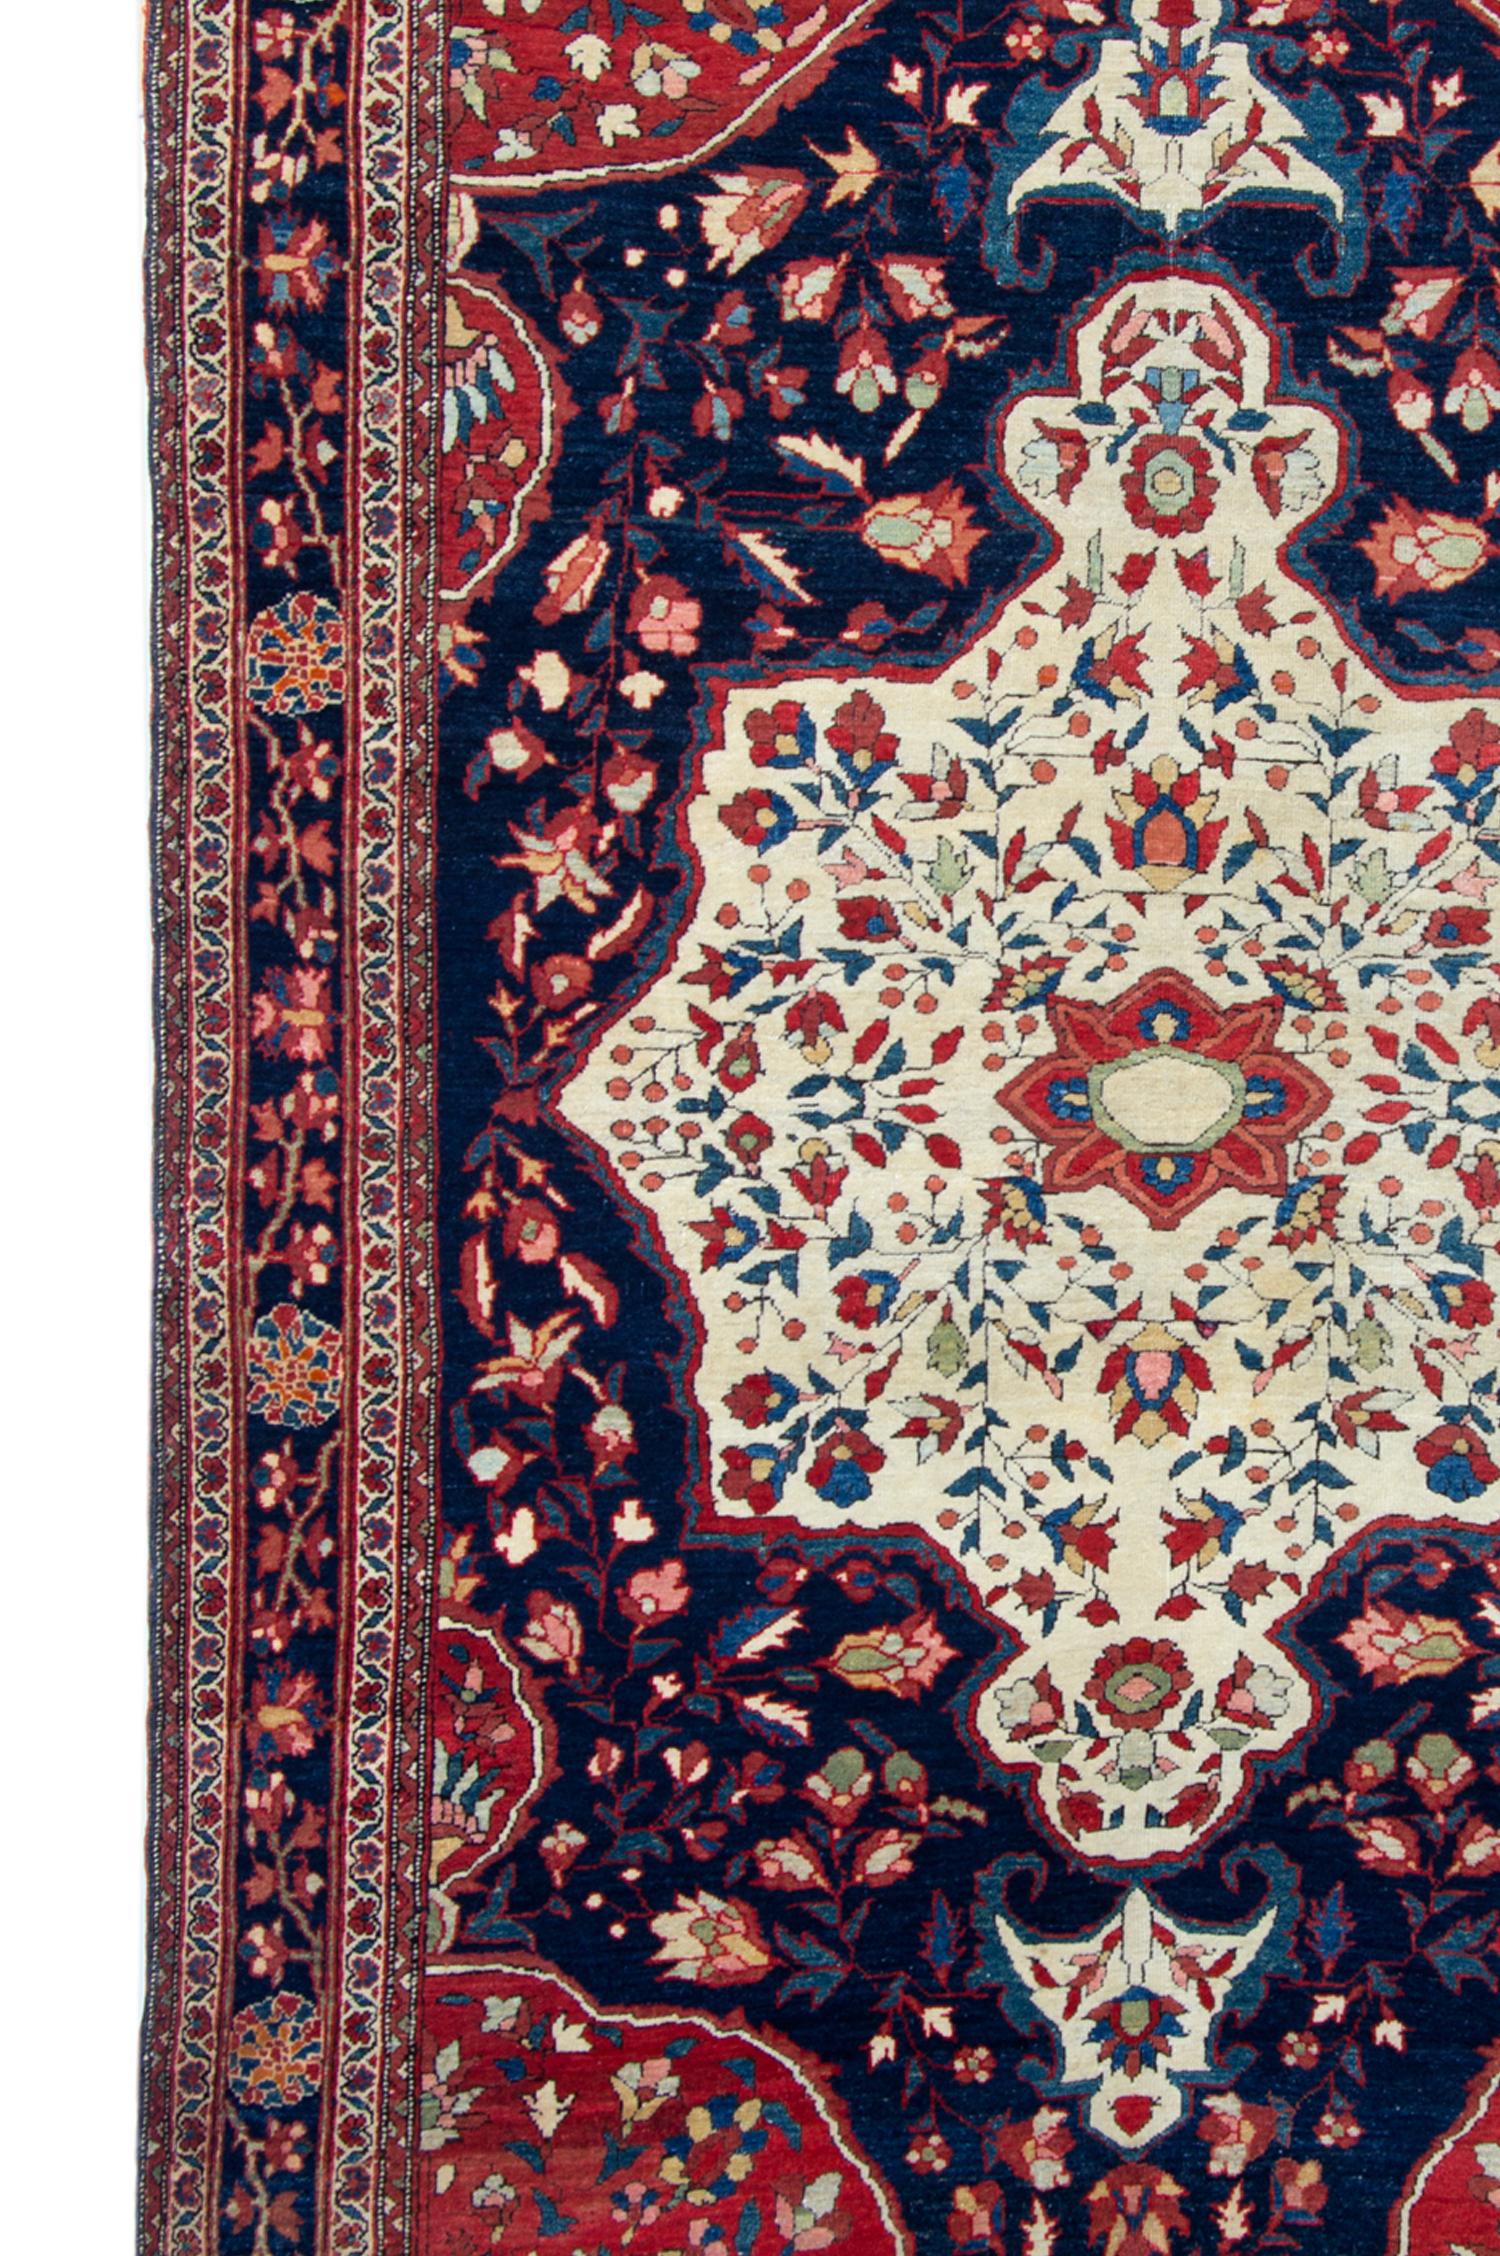 Hand-Crafted Handmade Carpet Antique Rug Traditional Red Blue Wool Area Rug For Sale